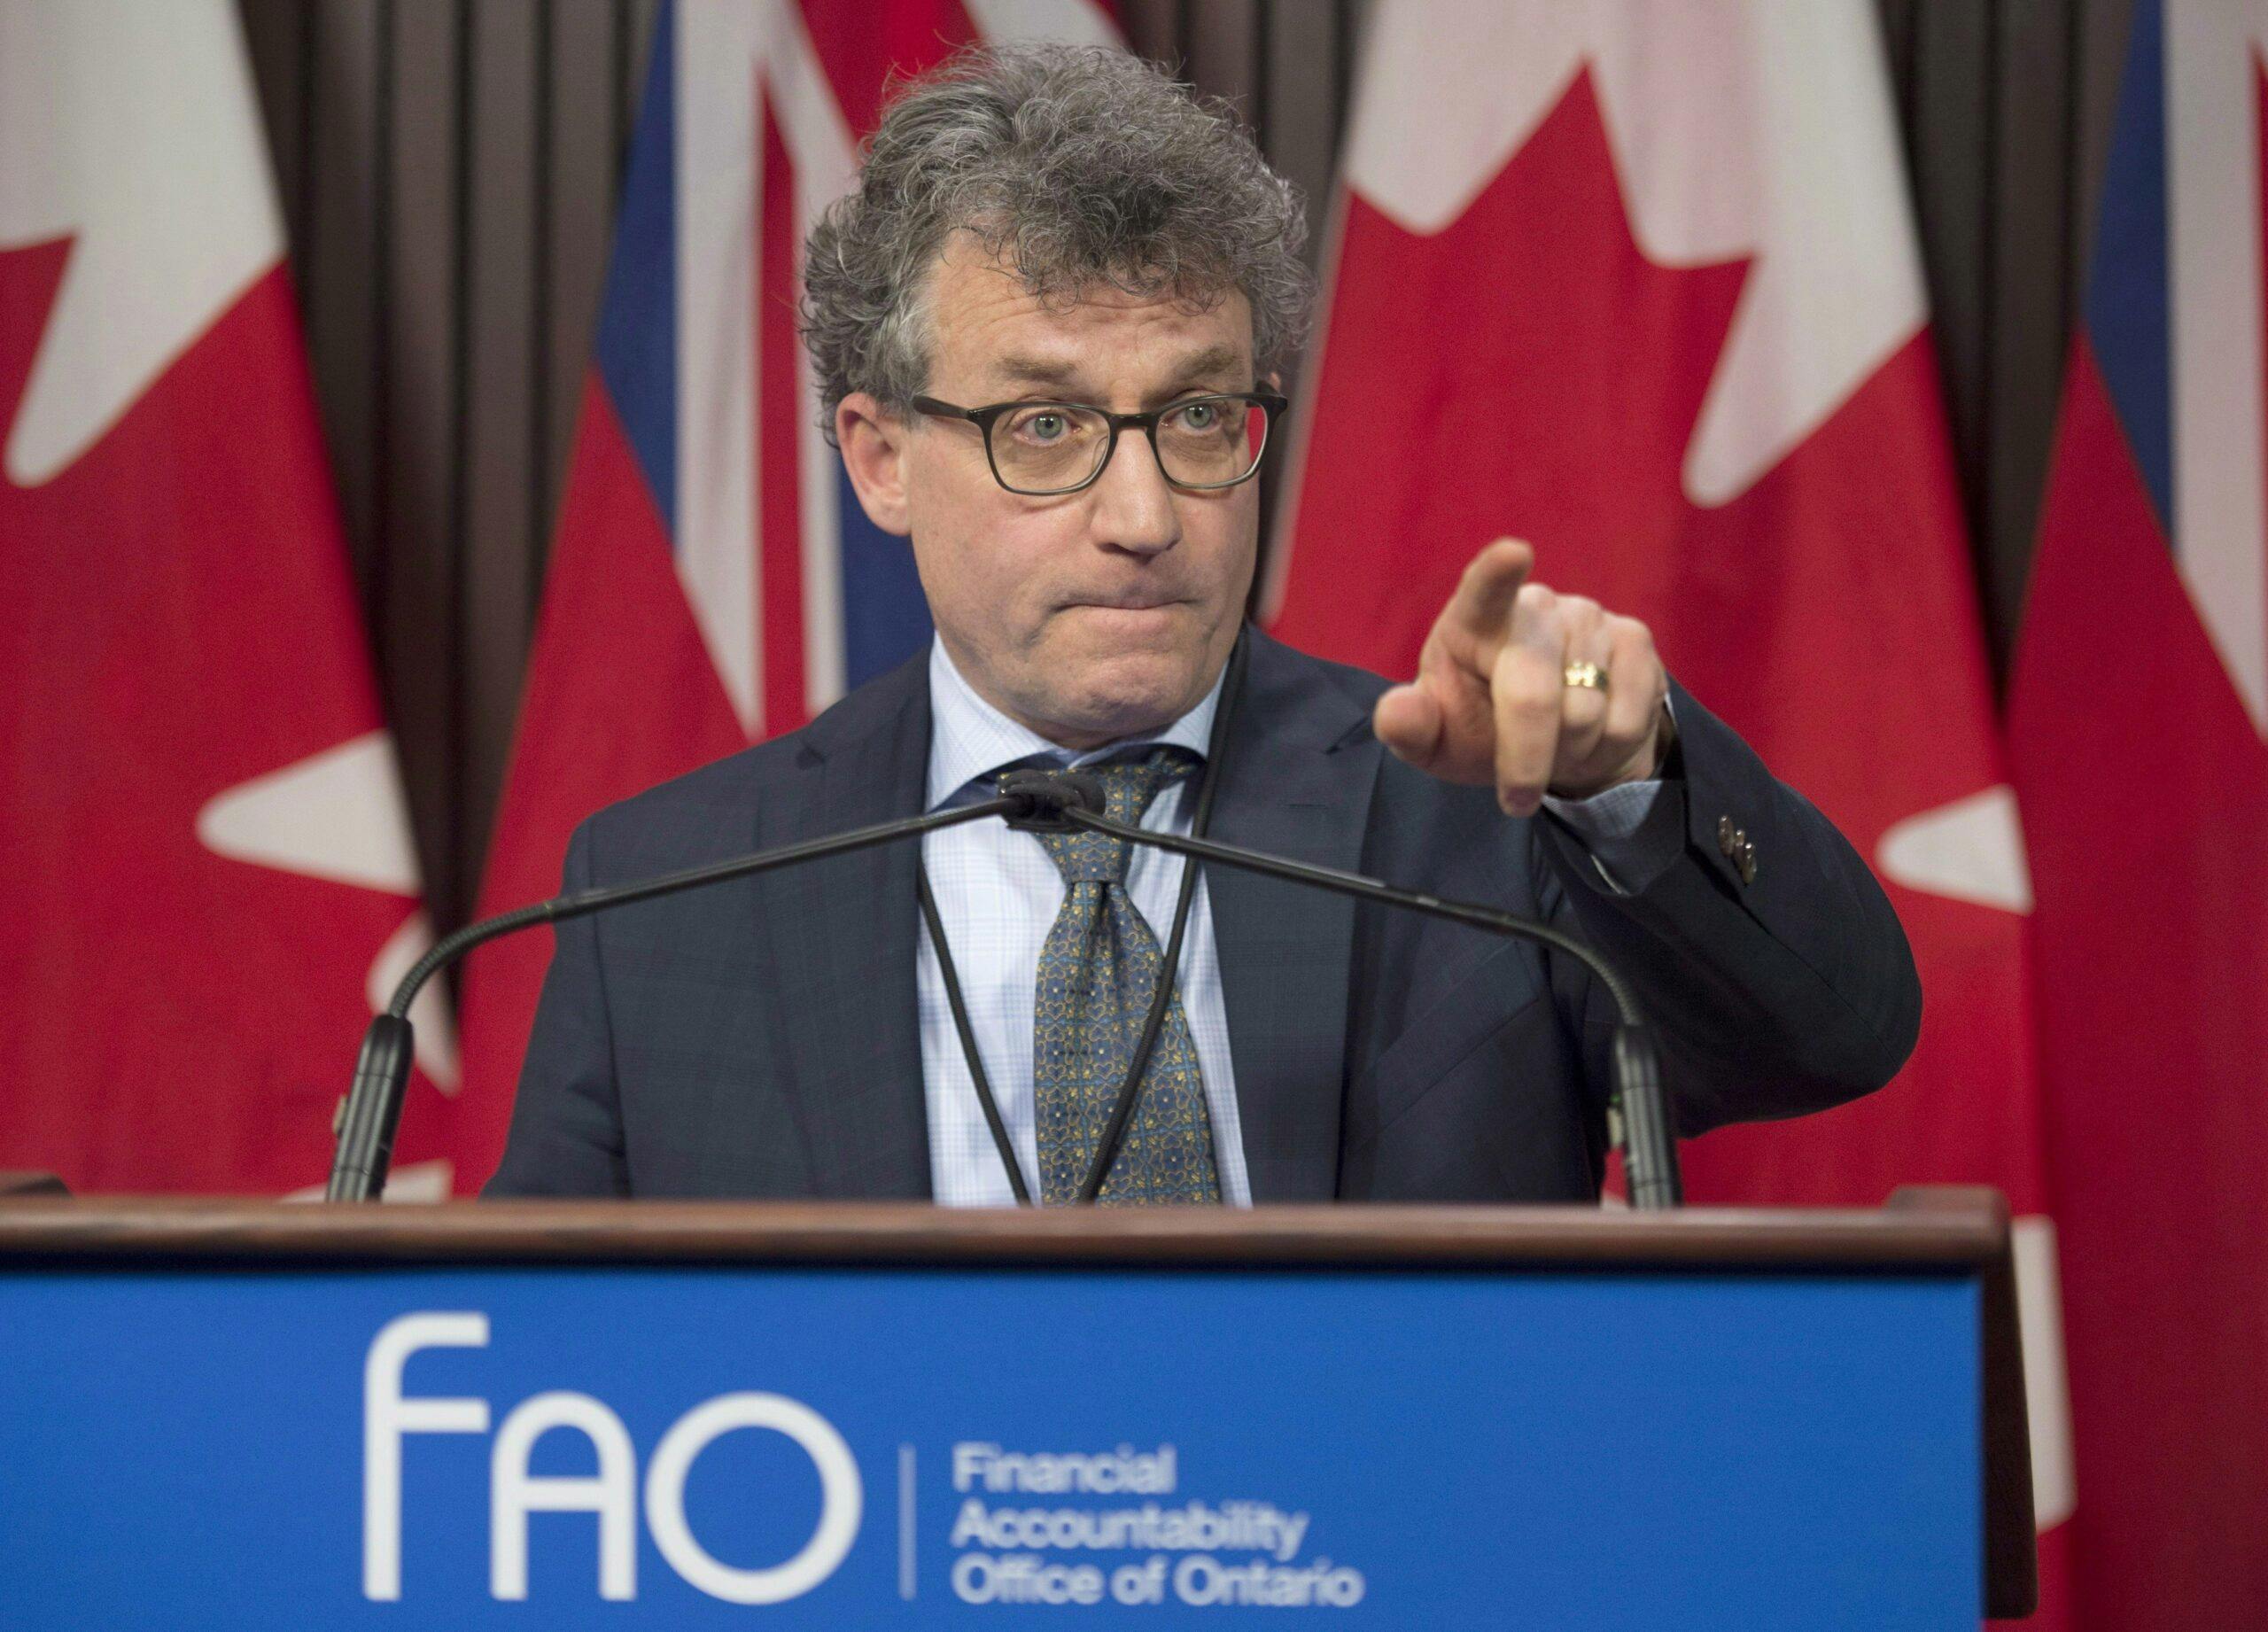 FAO: PCs spent $7 billion less than planned in last fiscal year